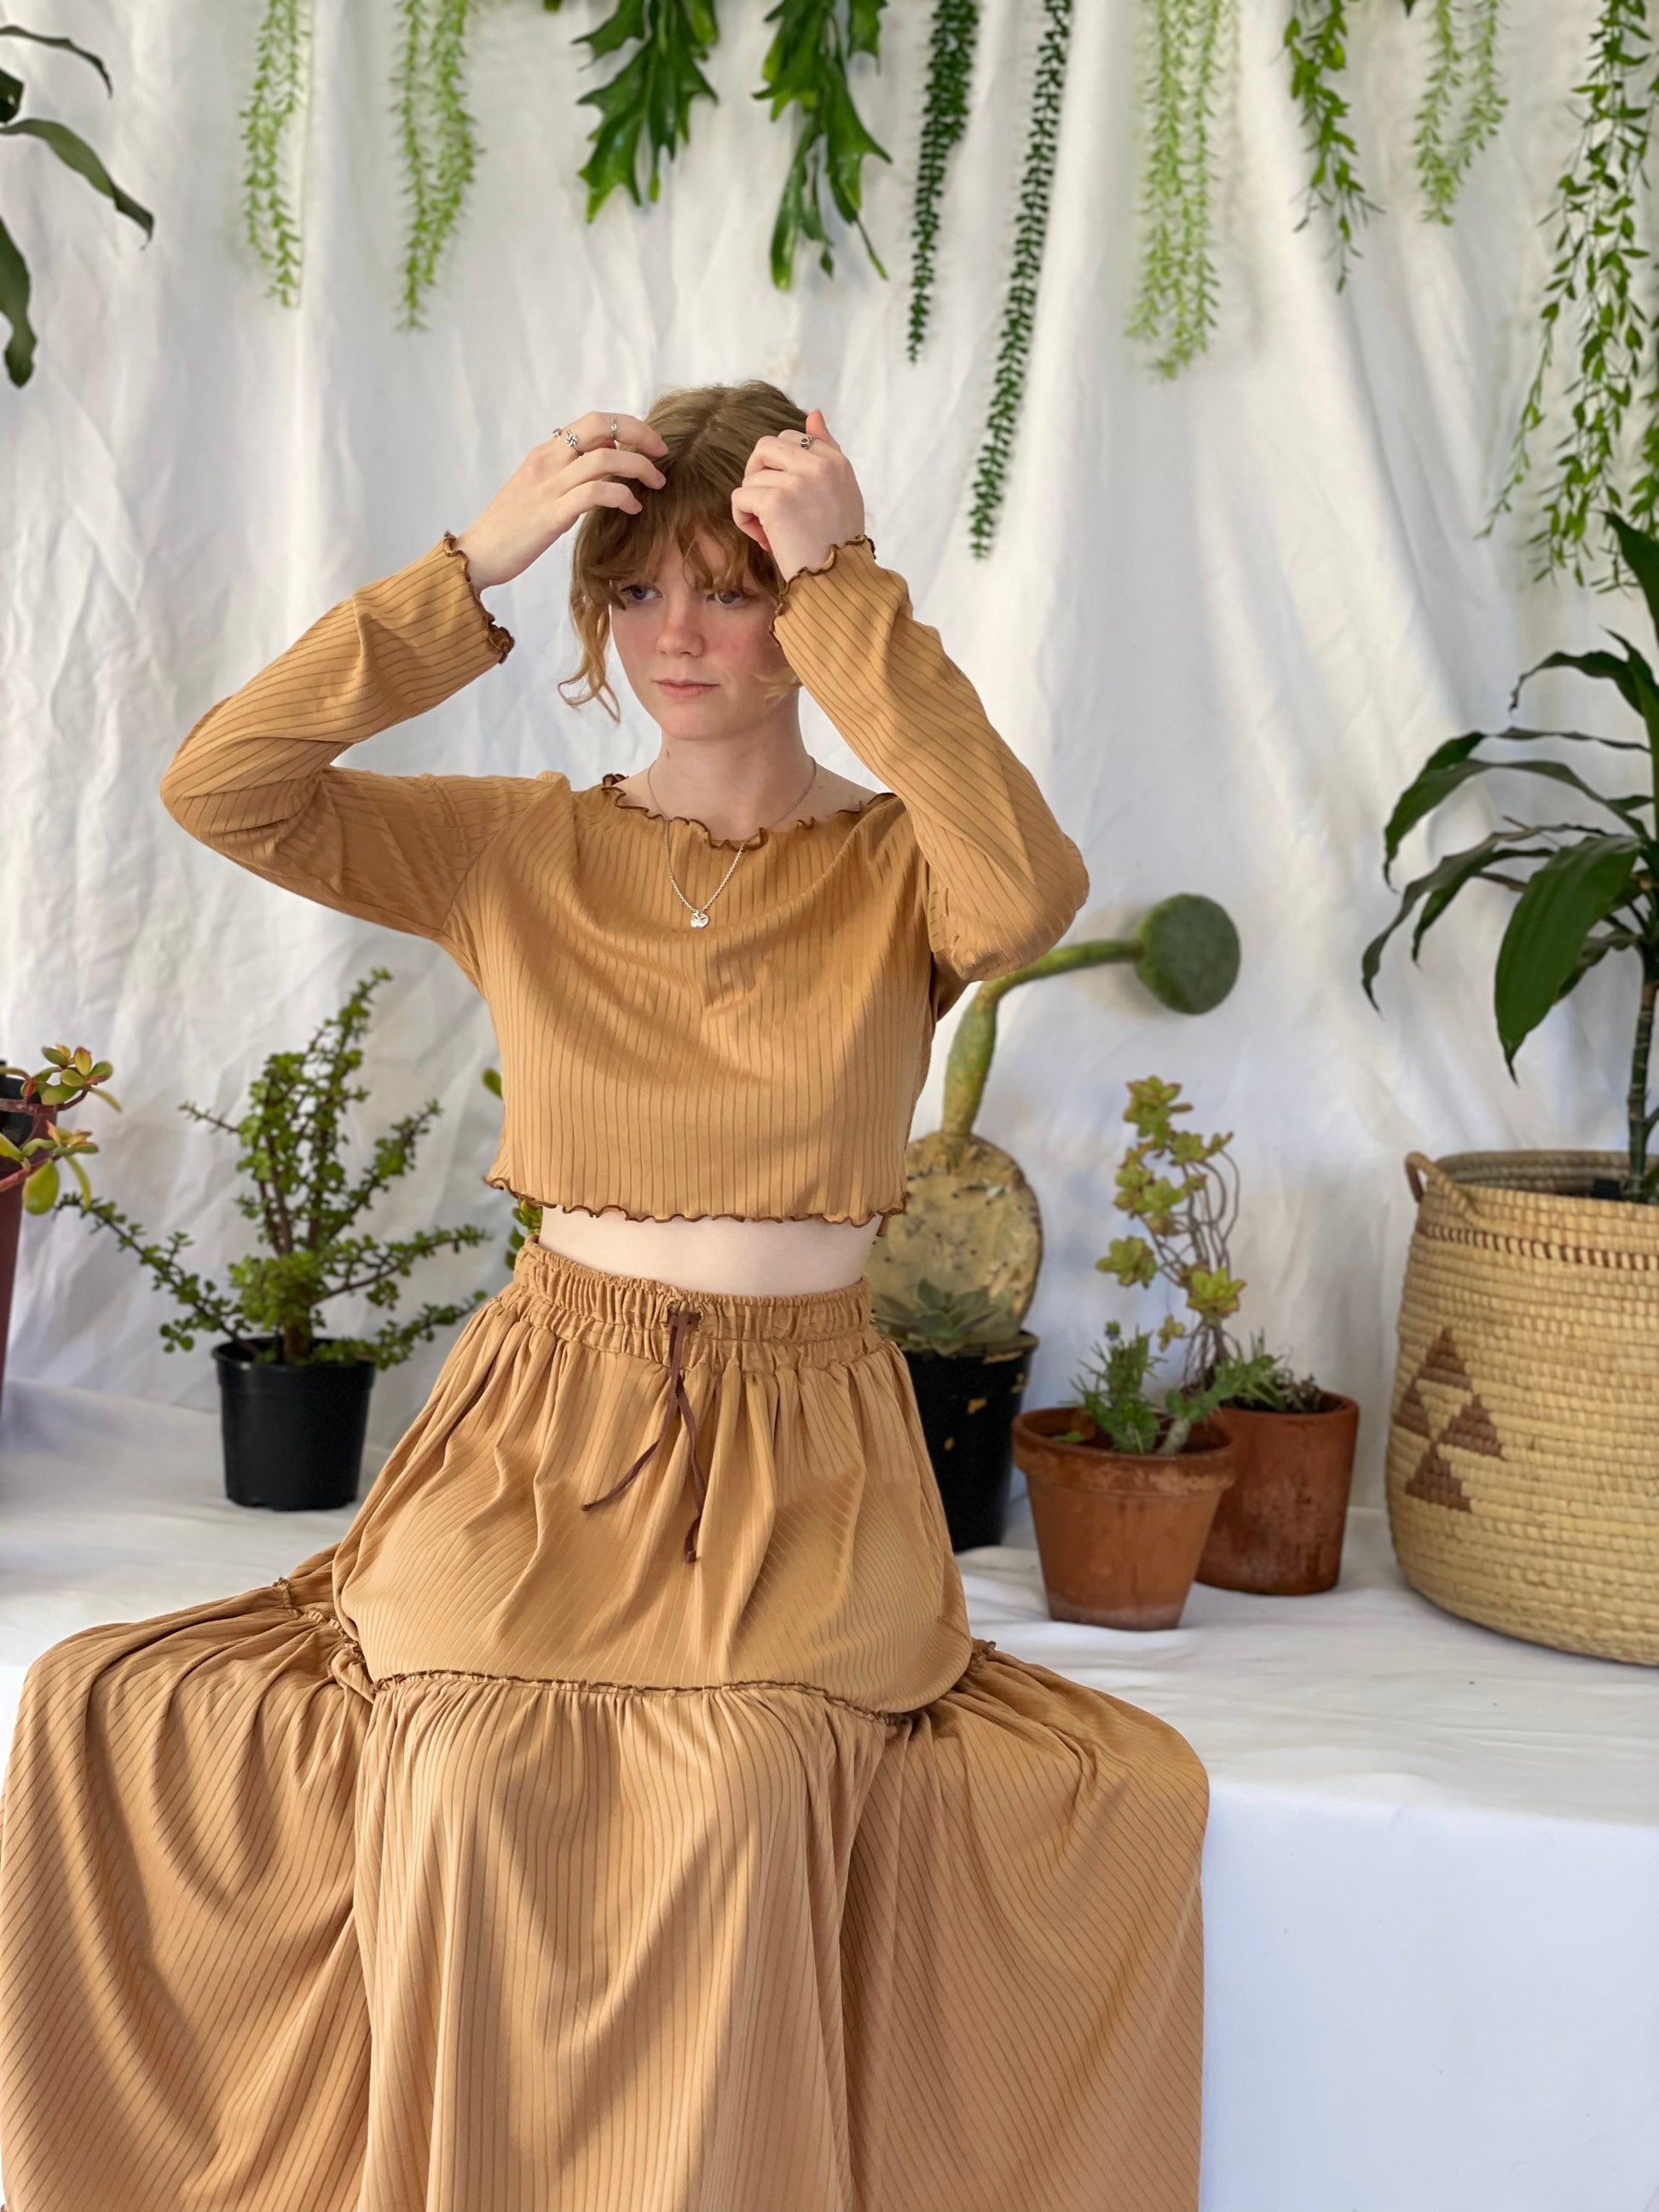 Model wears matching skirt and top set with silver necklace. The model sits in front of a white backdrop with pot plants. 